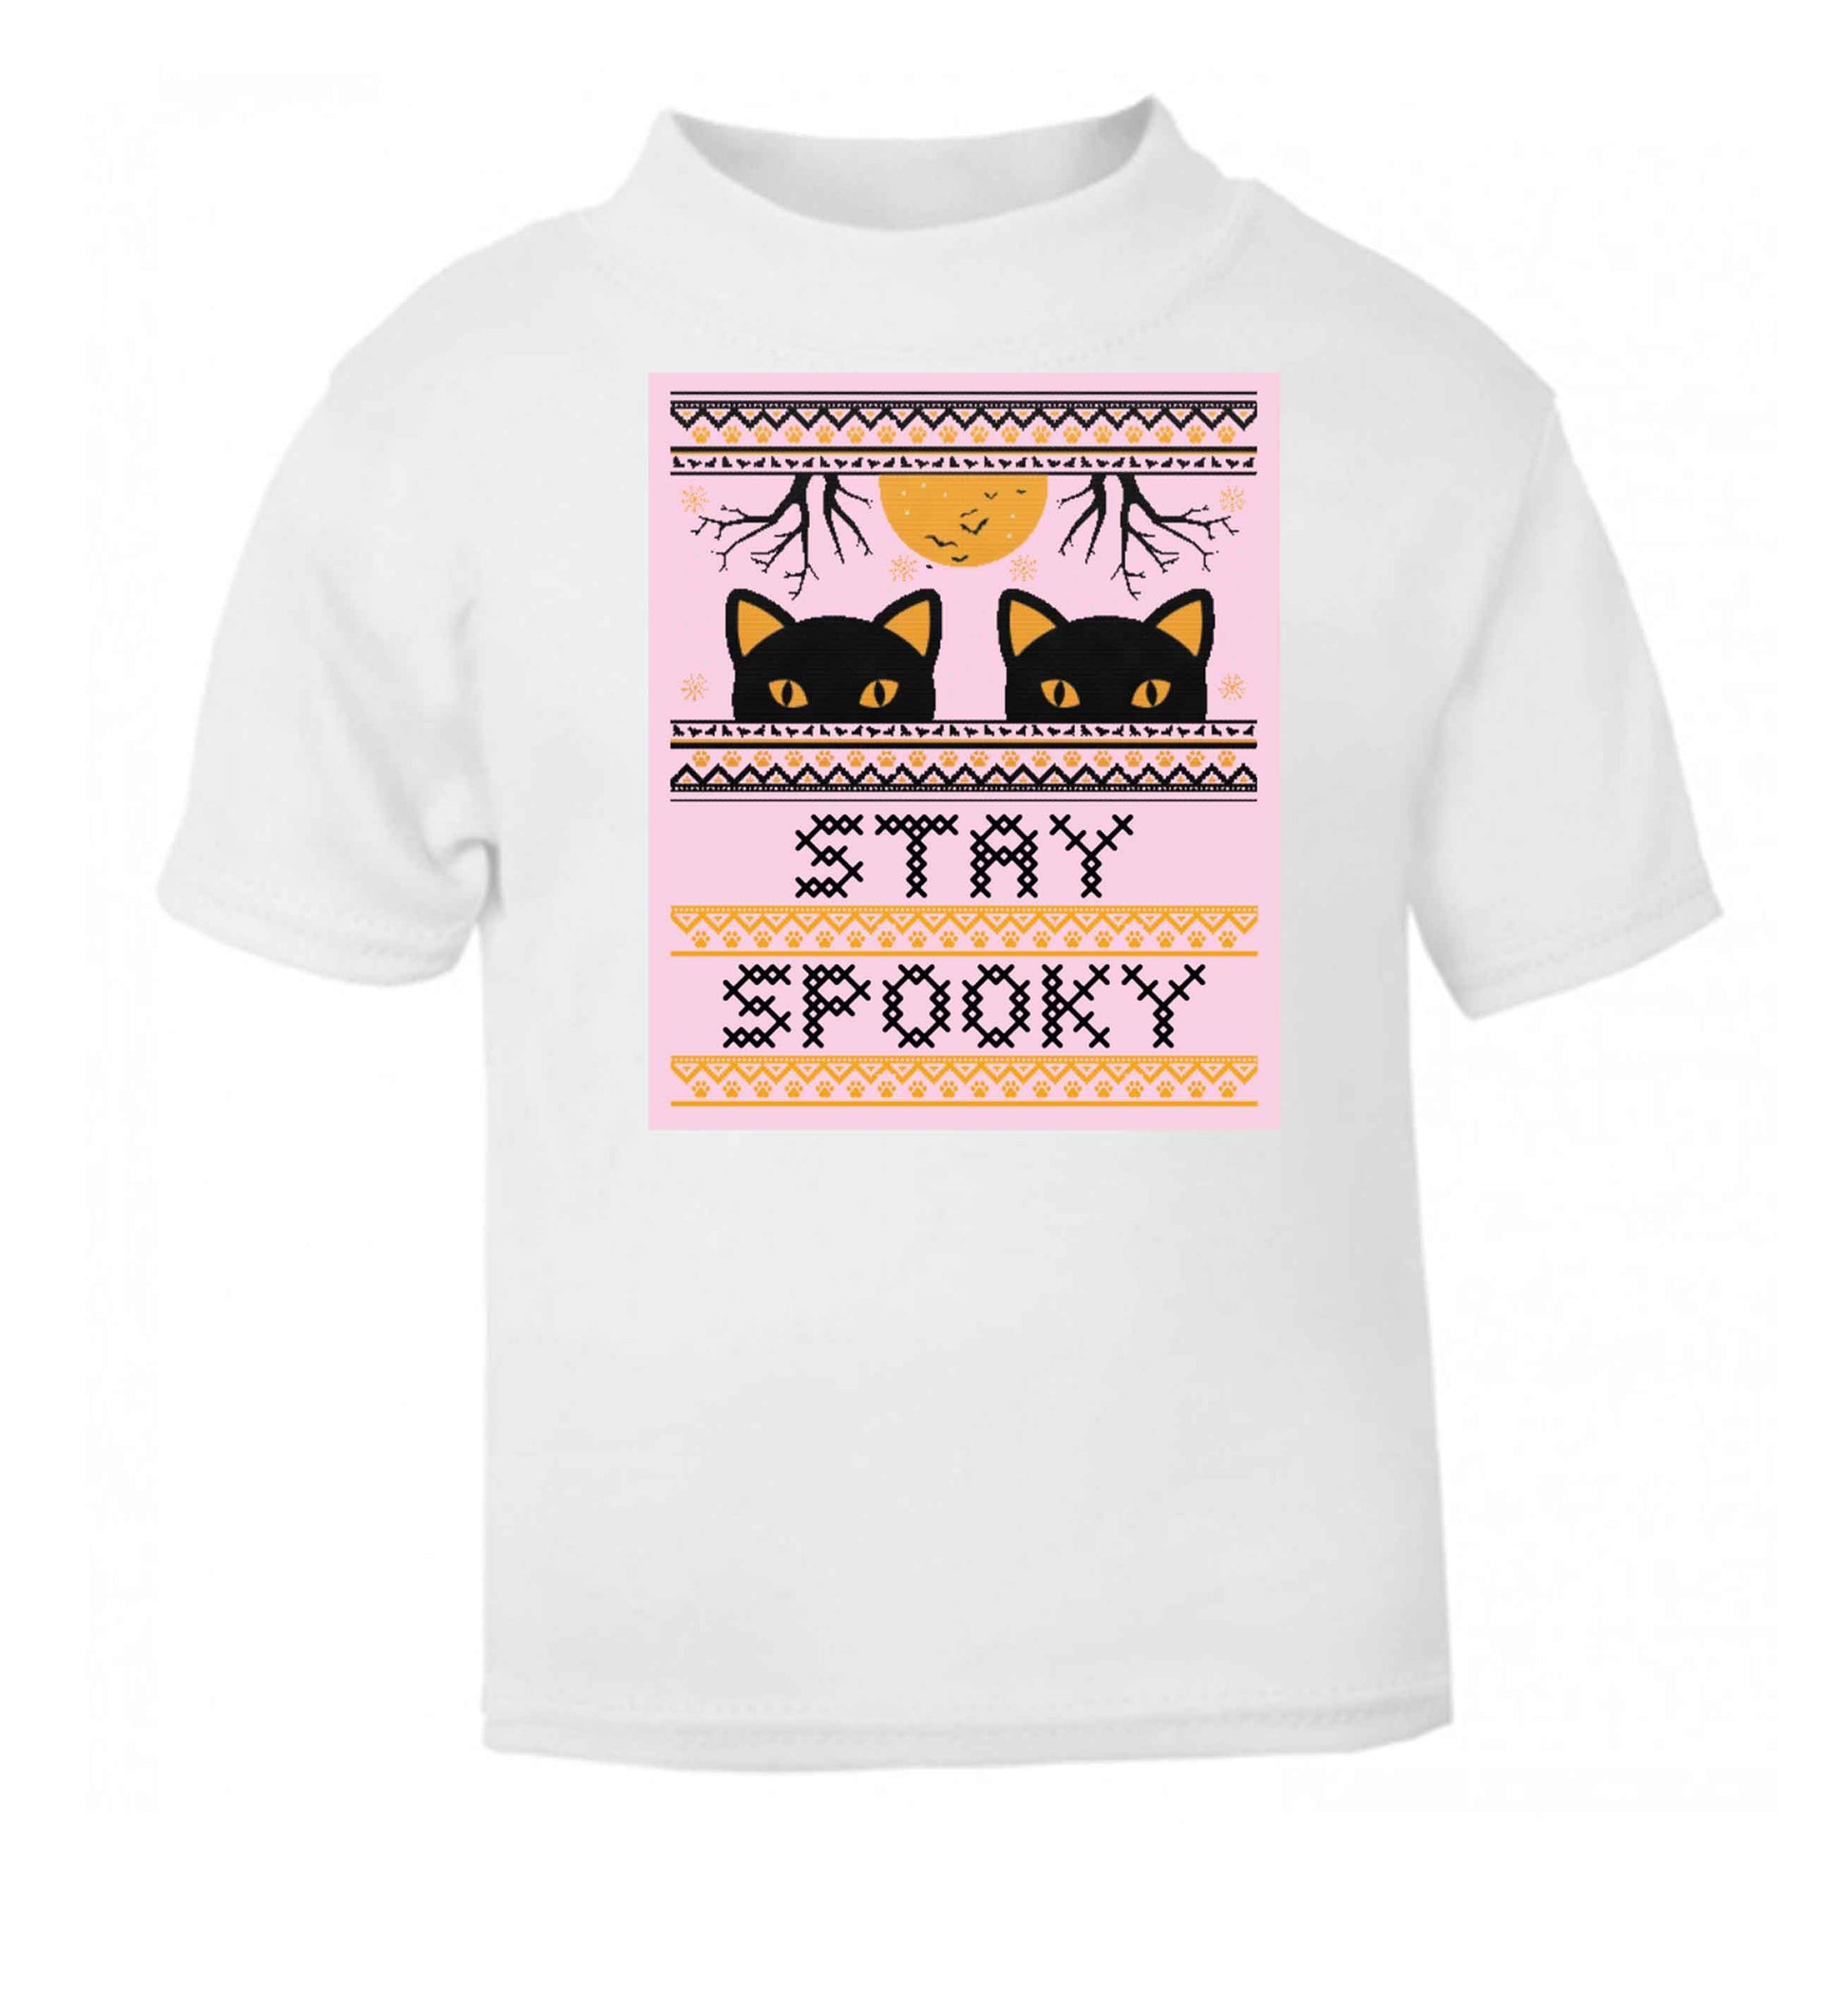 Stay spooky white baby toddler Tshirt 2 Years